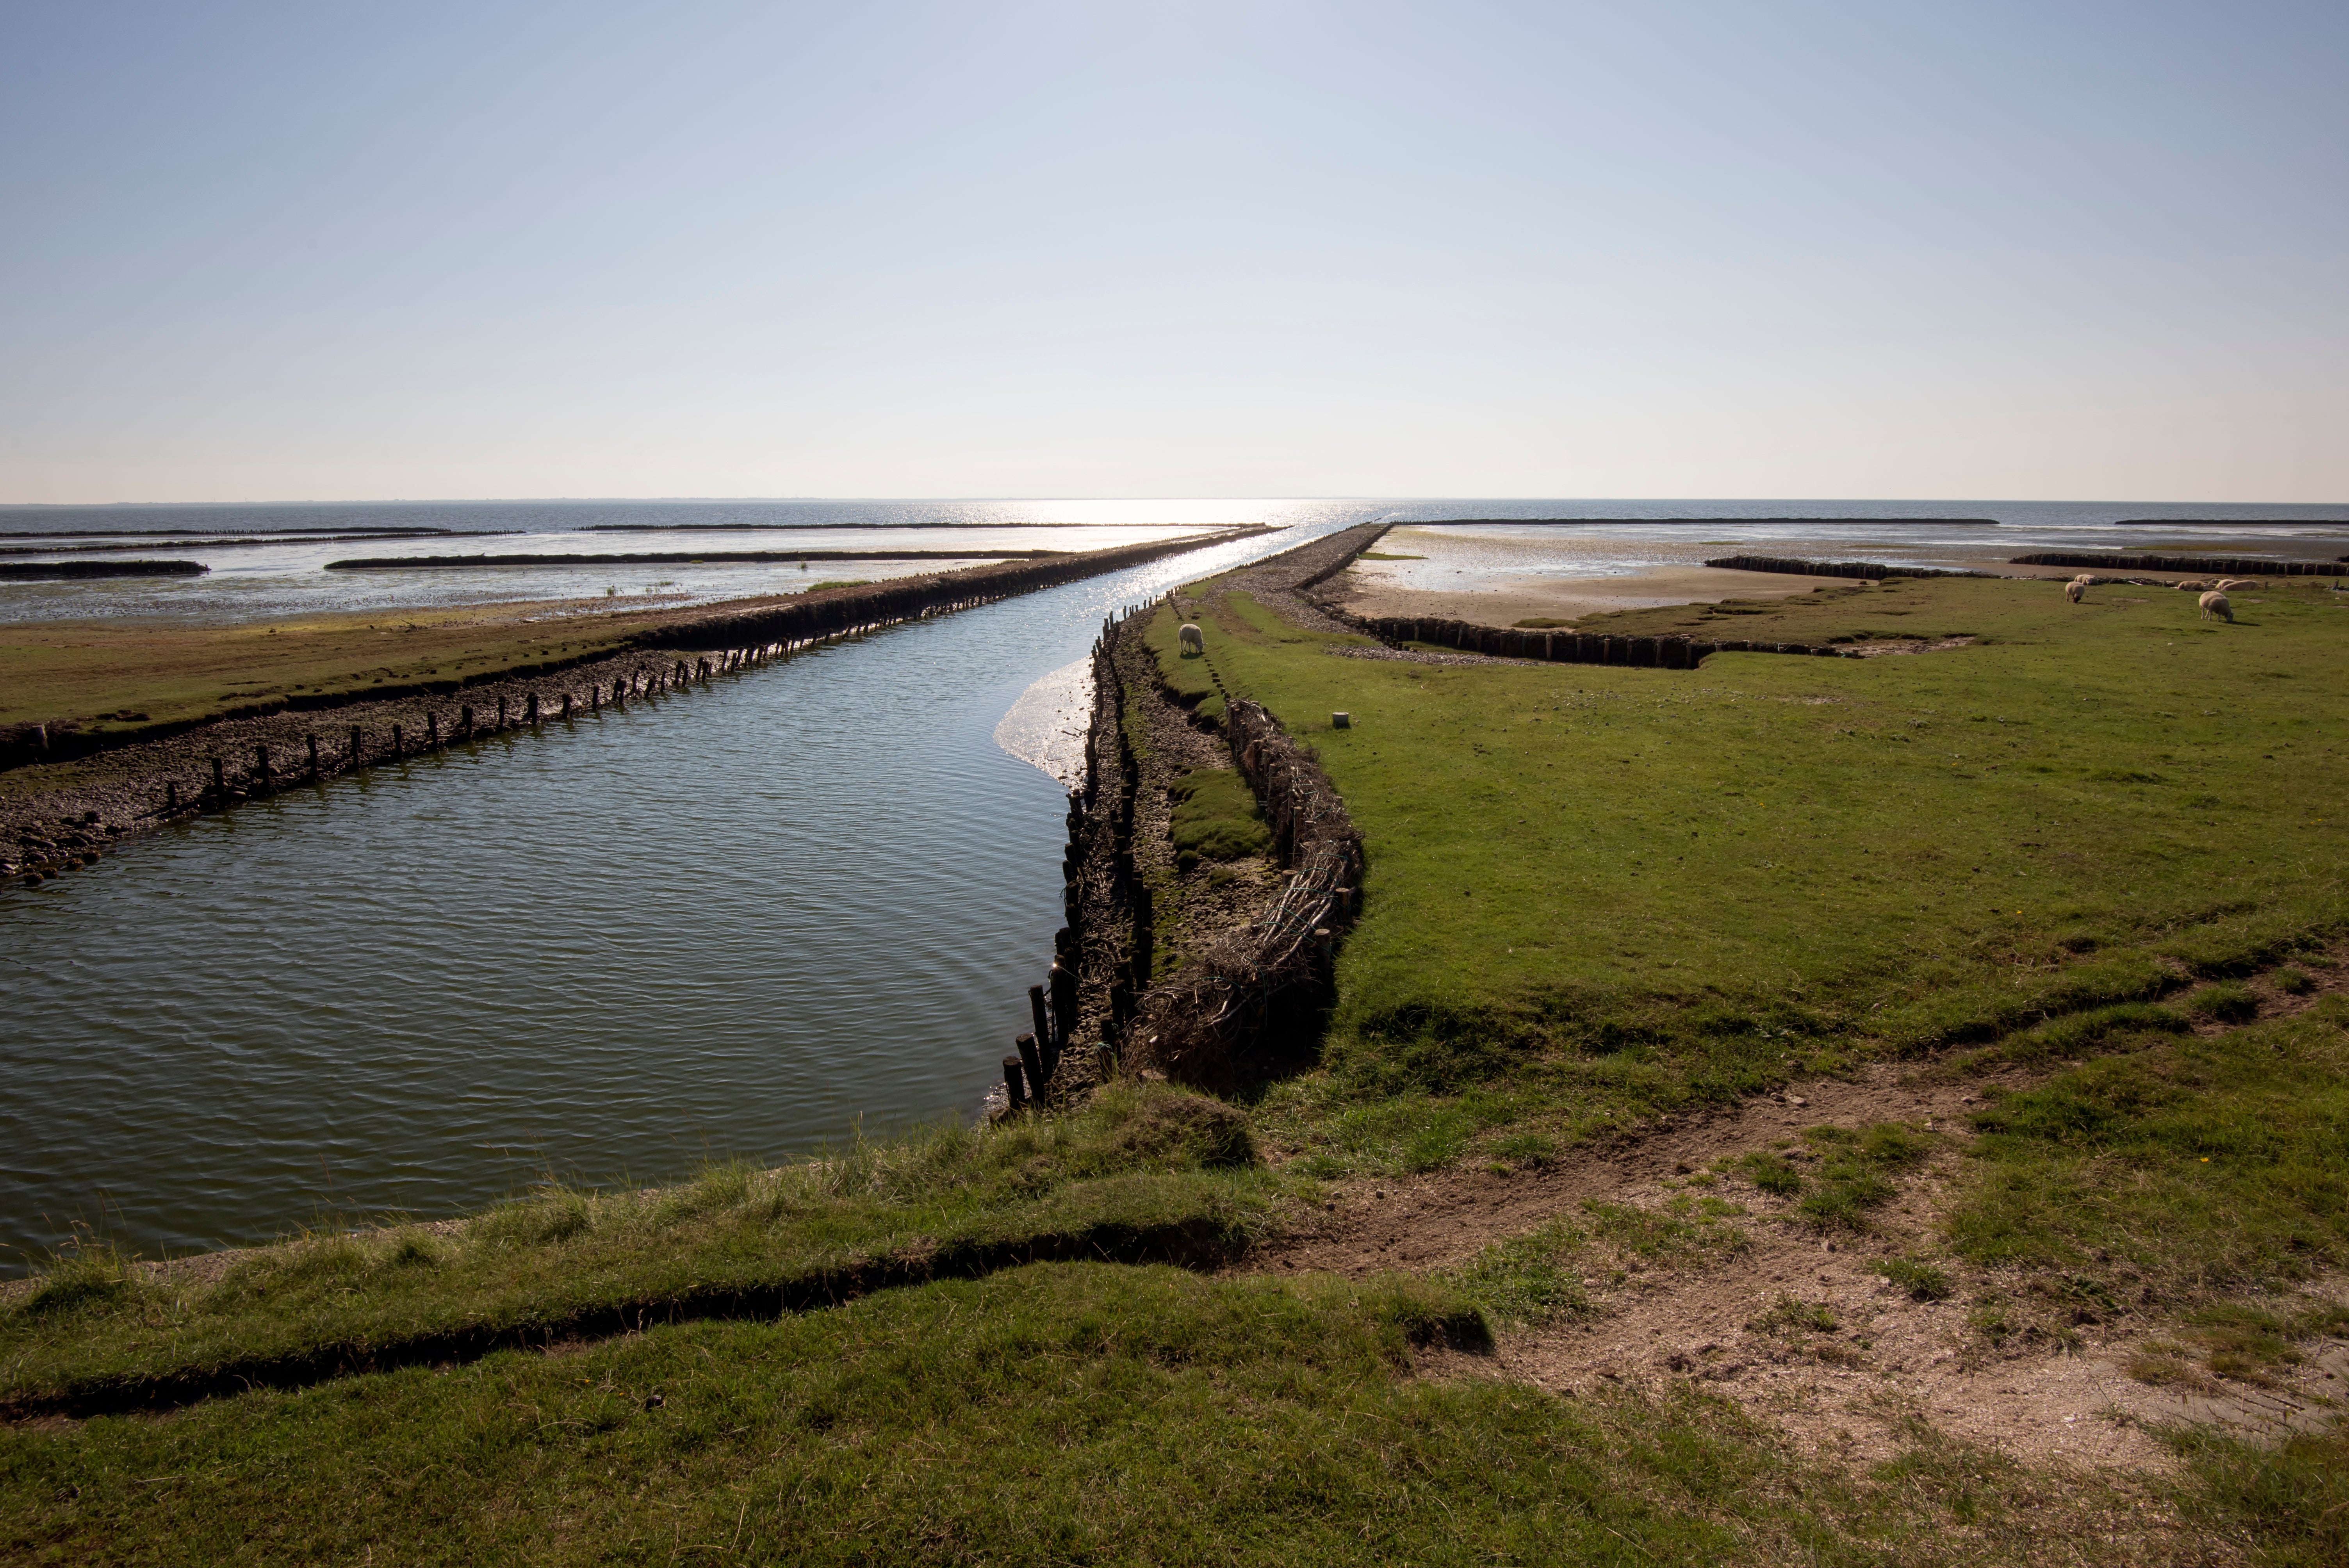 Wadden Sea National Park is a Unesco-listed area with beaches and estuaries